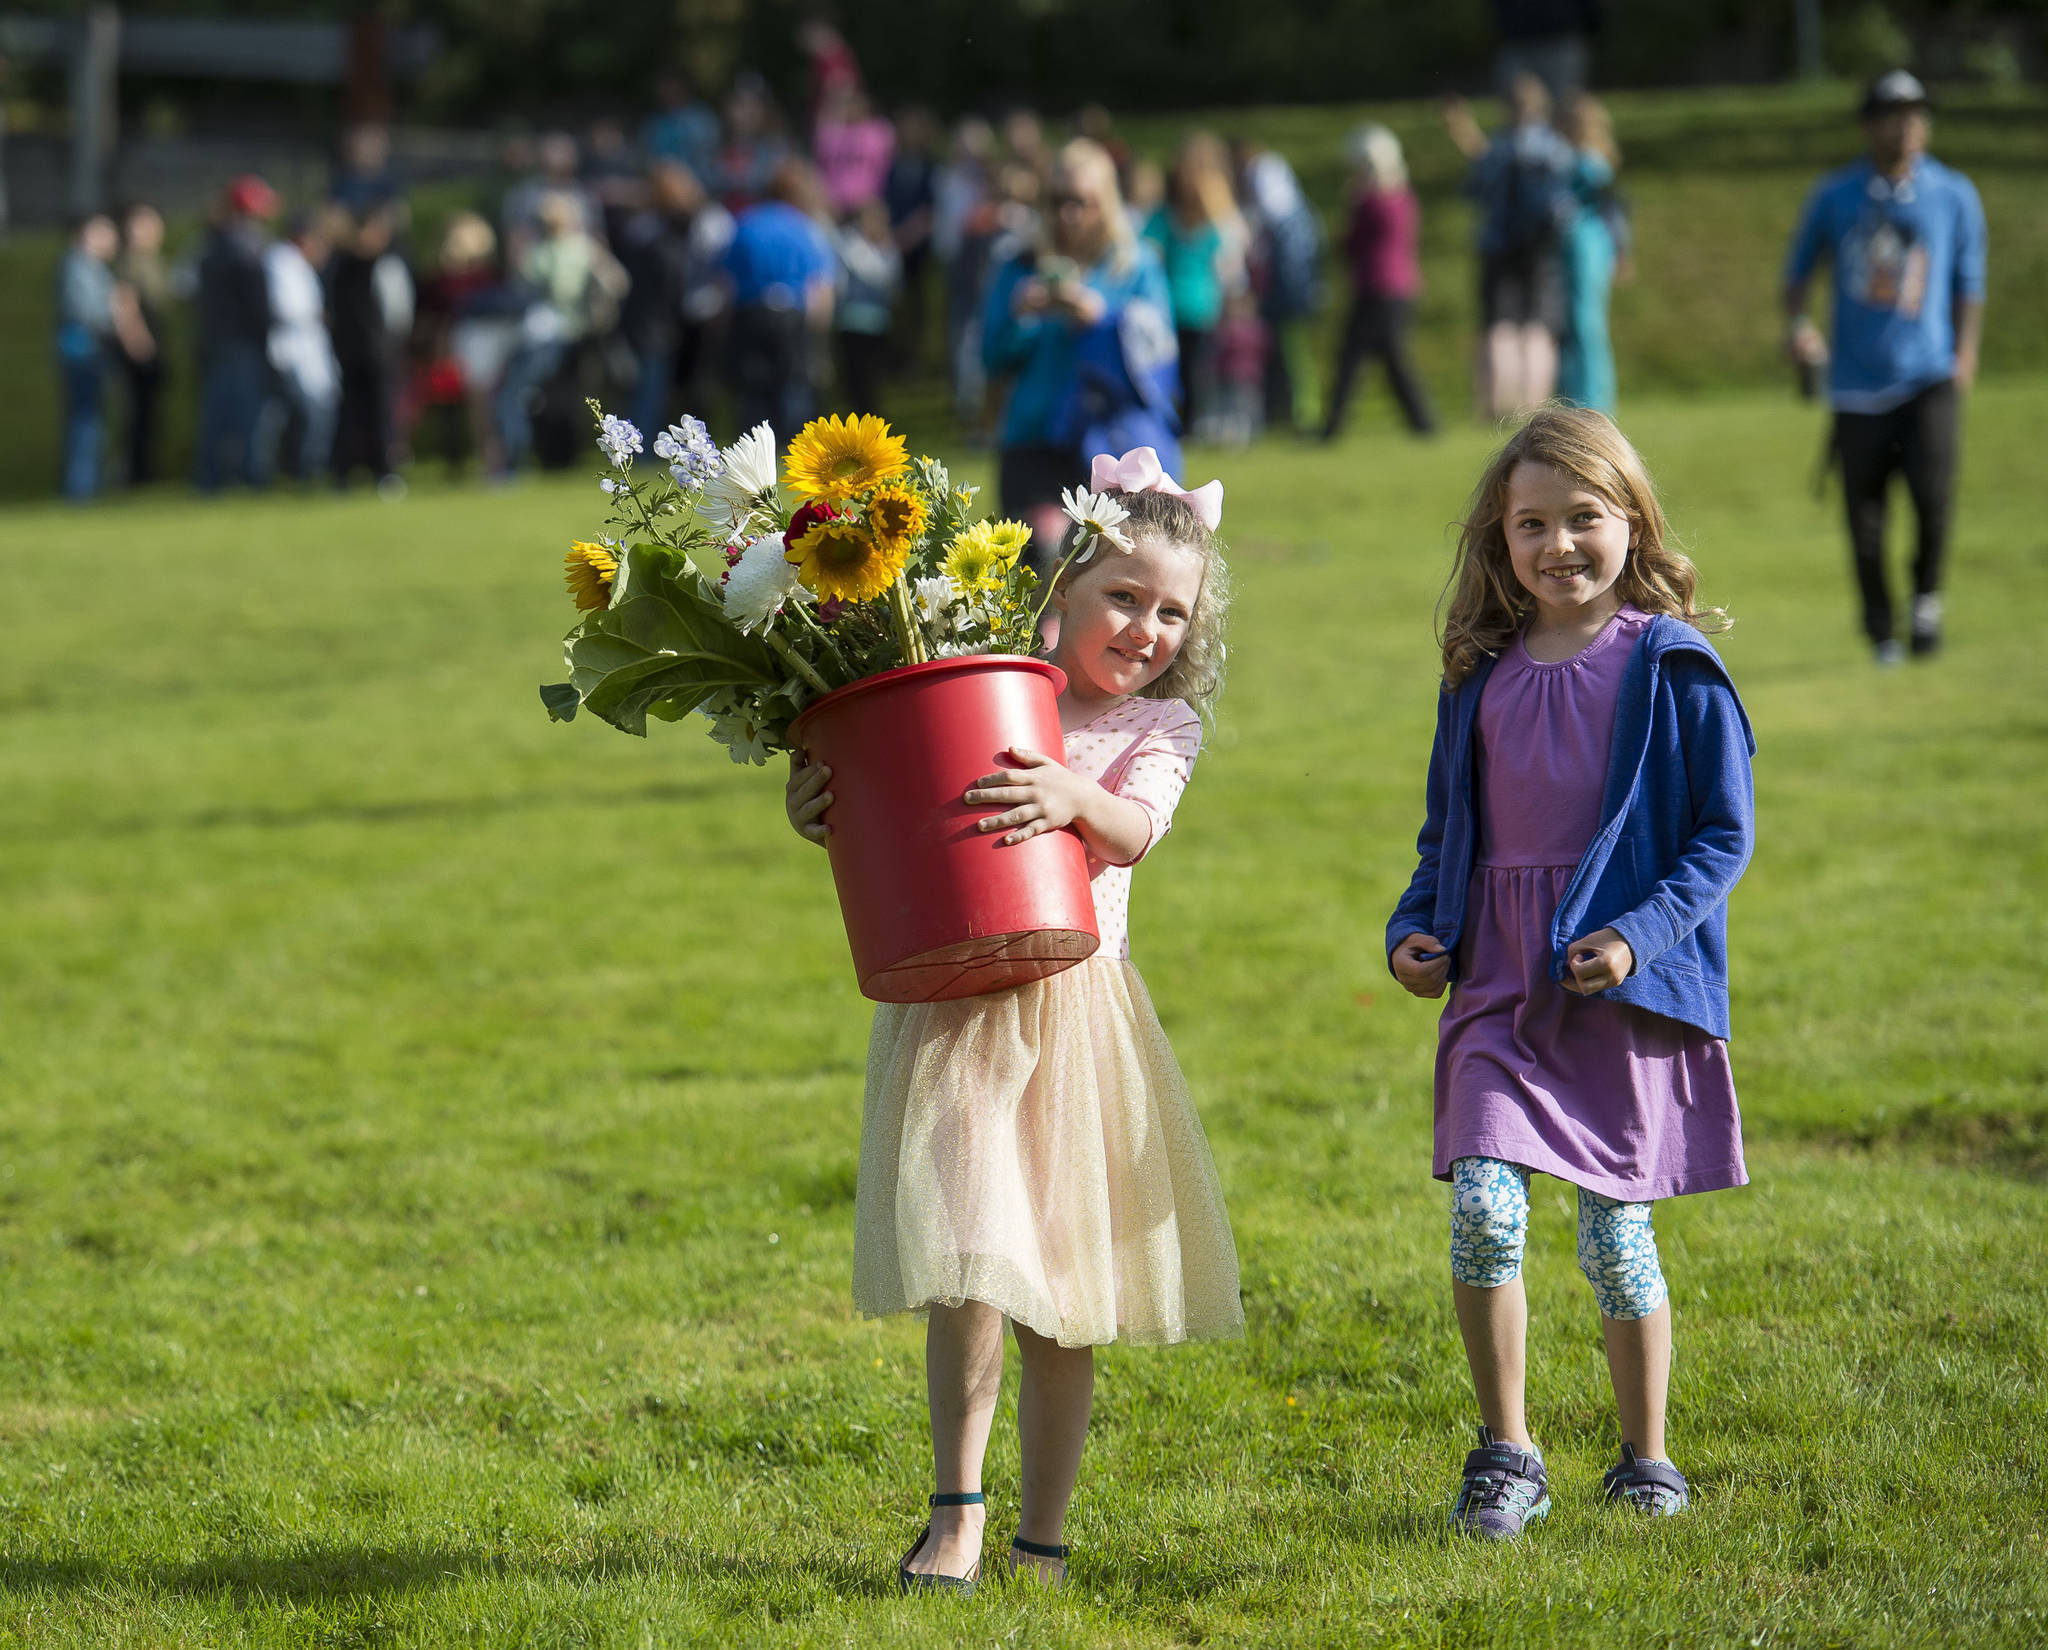 Juneau Community Charter School second-grader Elianna Amati, left, carries her class’s flowers with third-grader Rebecca Frank after a ceremony at Evergreen Cemetery on the first of the school year on Monday, Aug. 20, 2018. (Michael Penn | Juneau Empire)